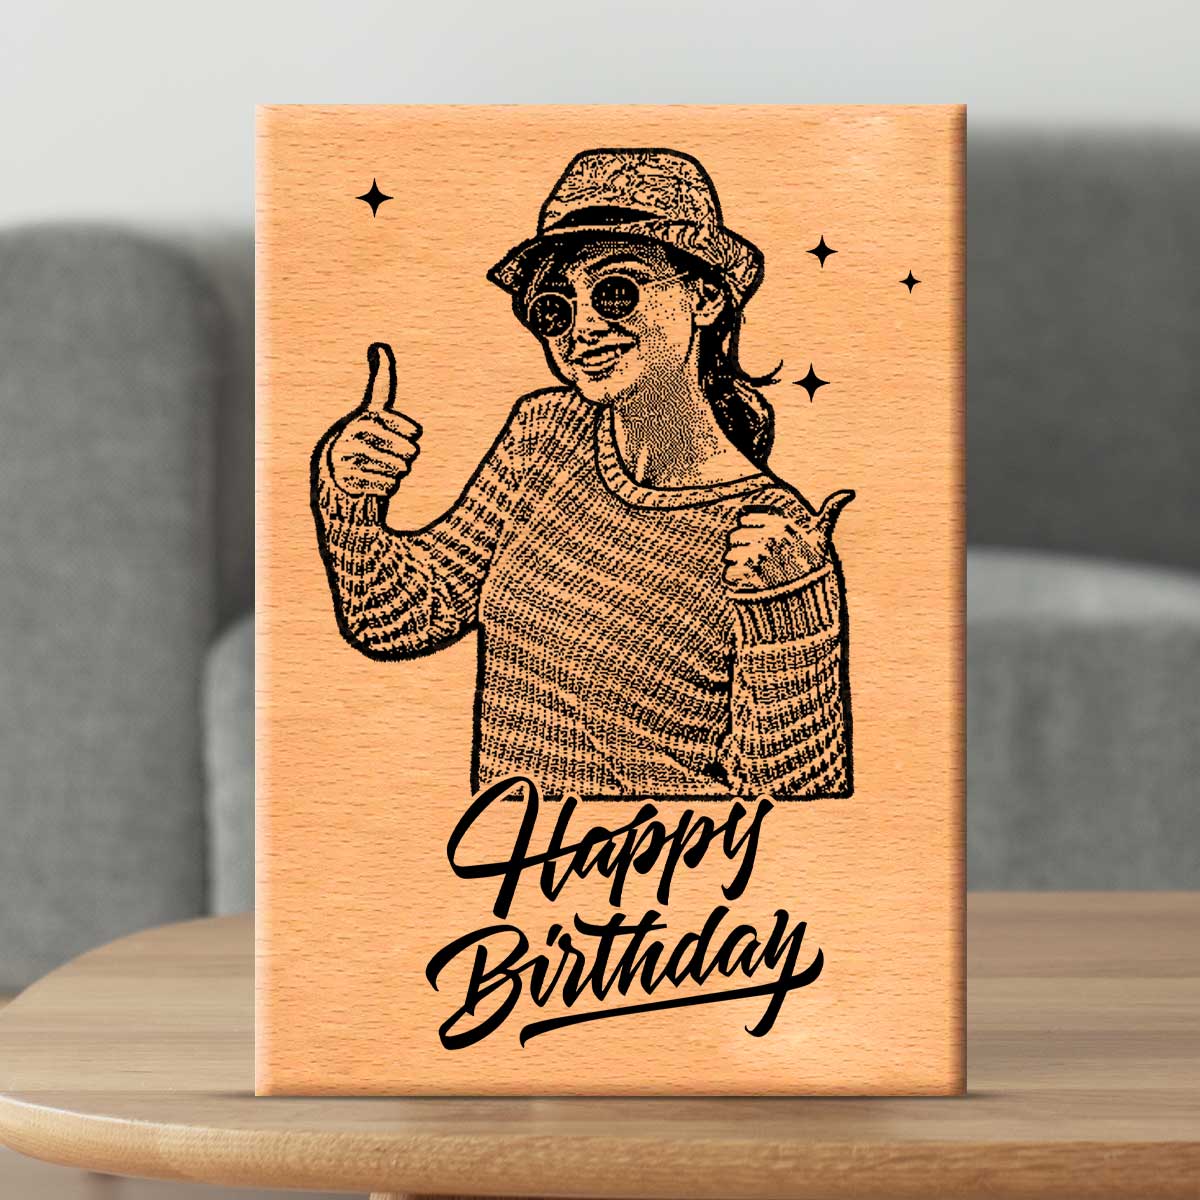 Happy Birthday Wooden Plaque Engraved Photo Frame